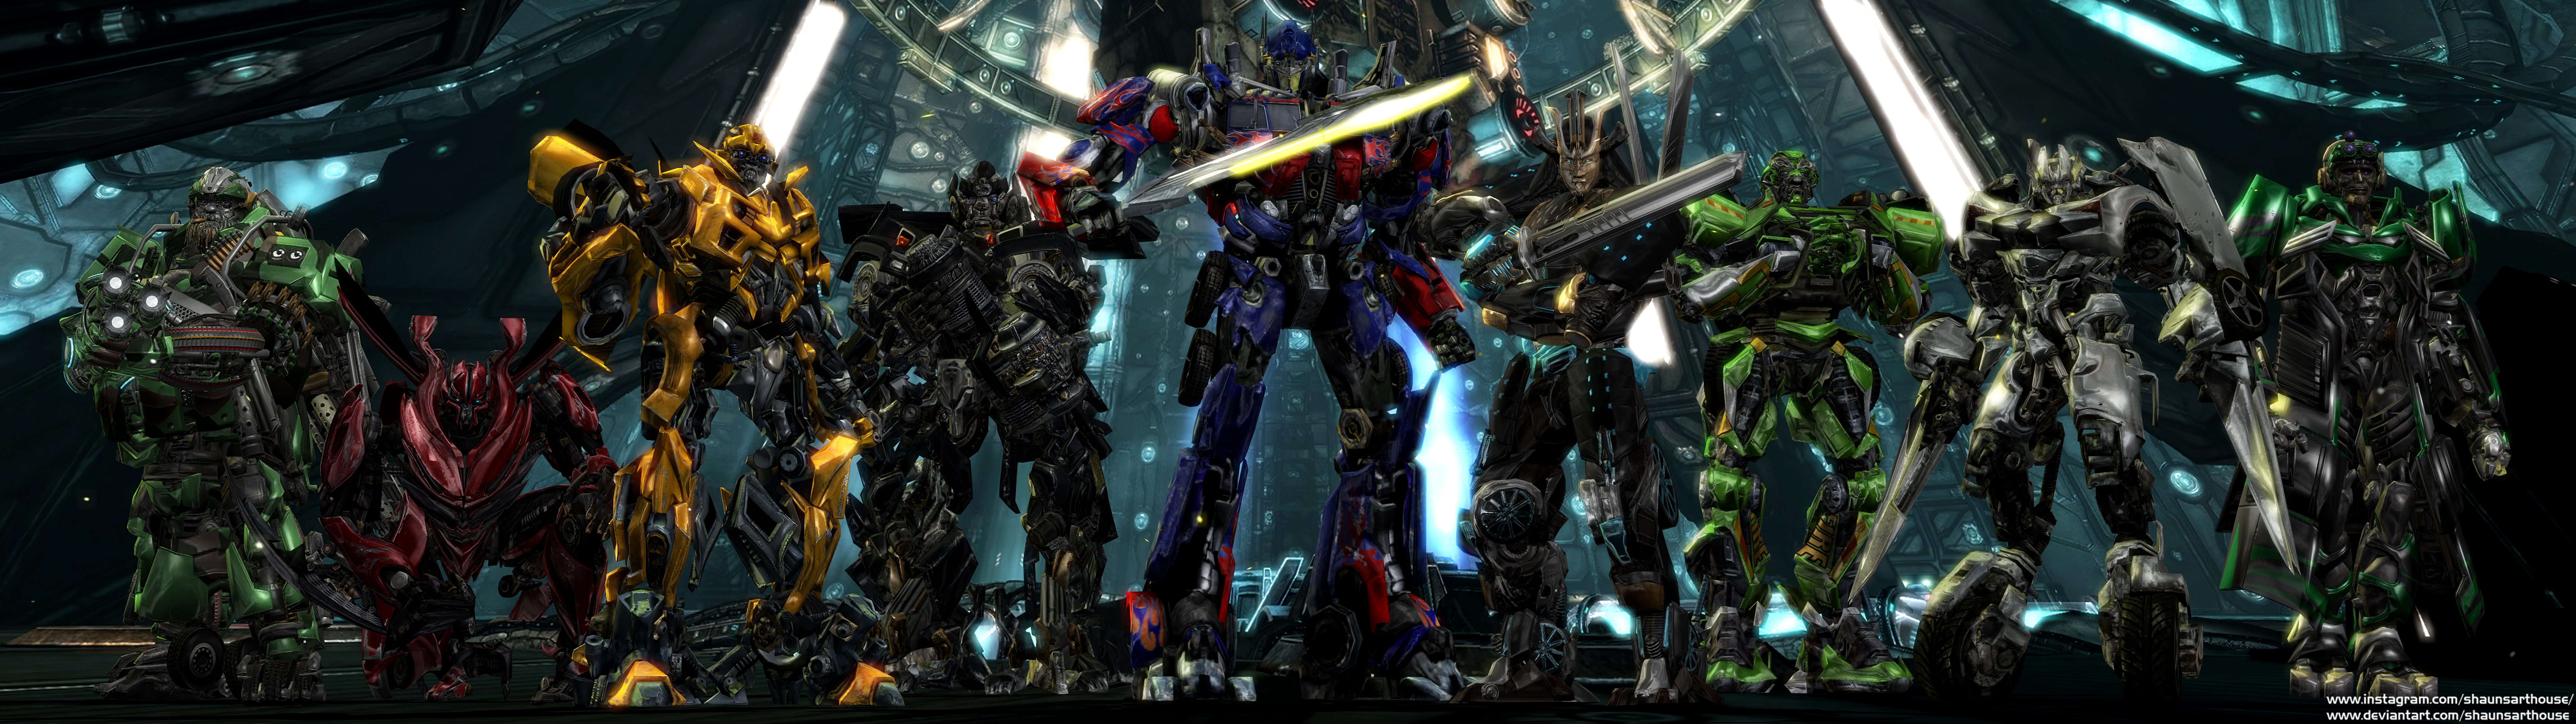 Autobots Dual Screen Wallpaper by